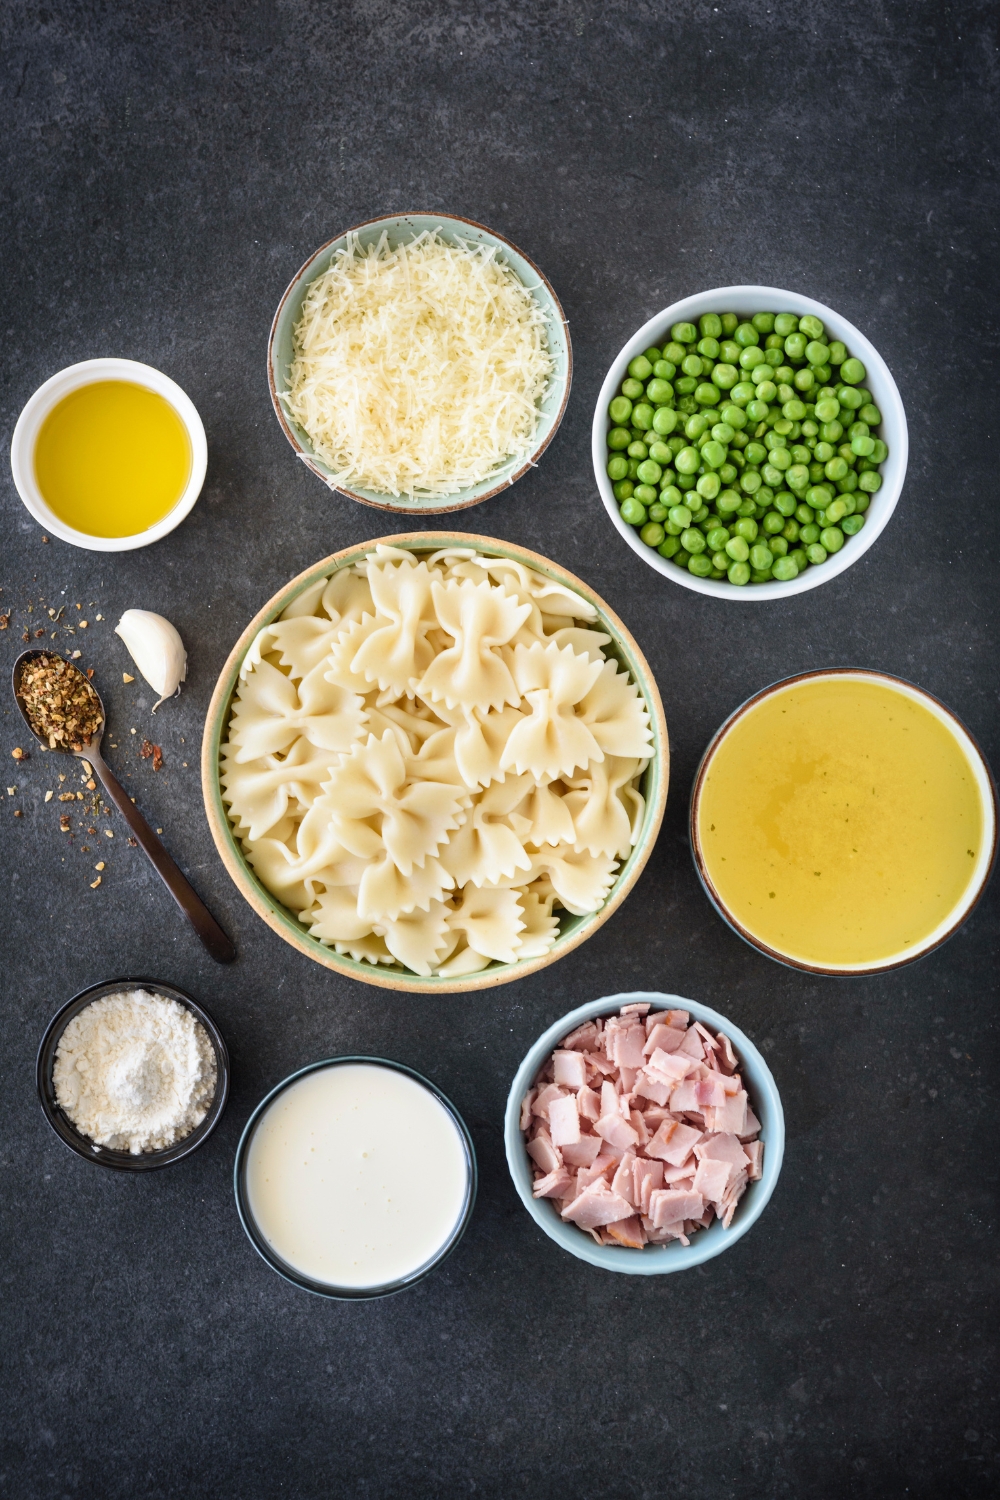 An assortment of ingredients including bowls of bow tie pasta, diced ham, peas, shredded cheese, flour, milk, and spices.